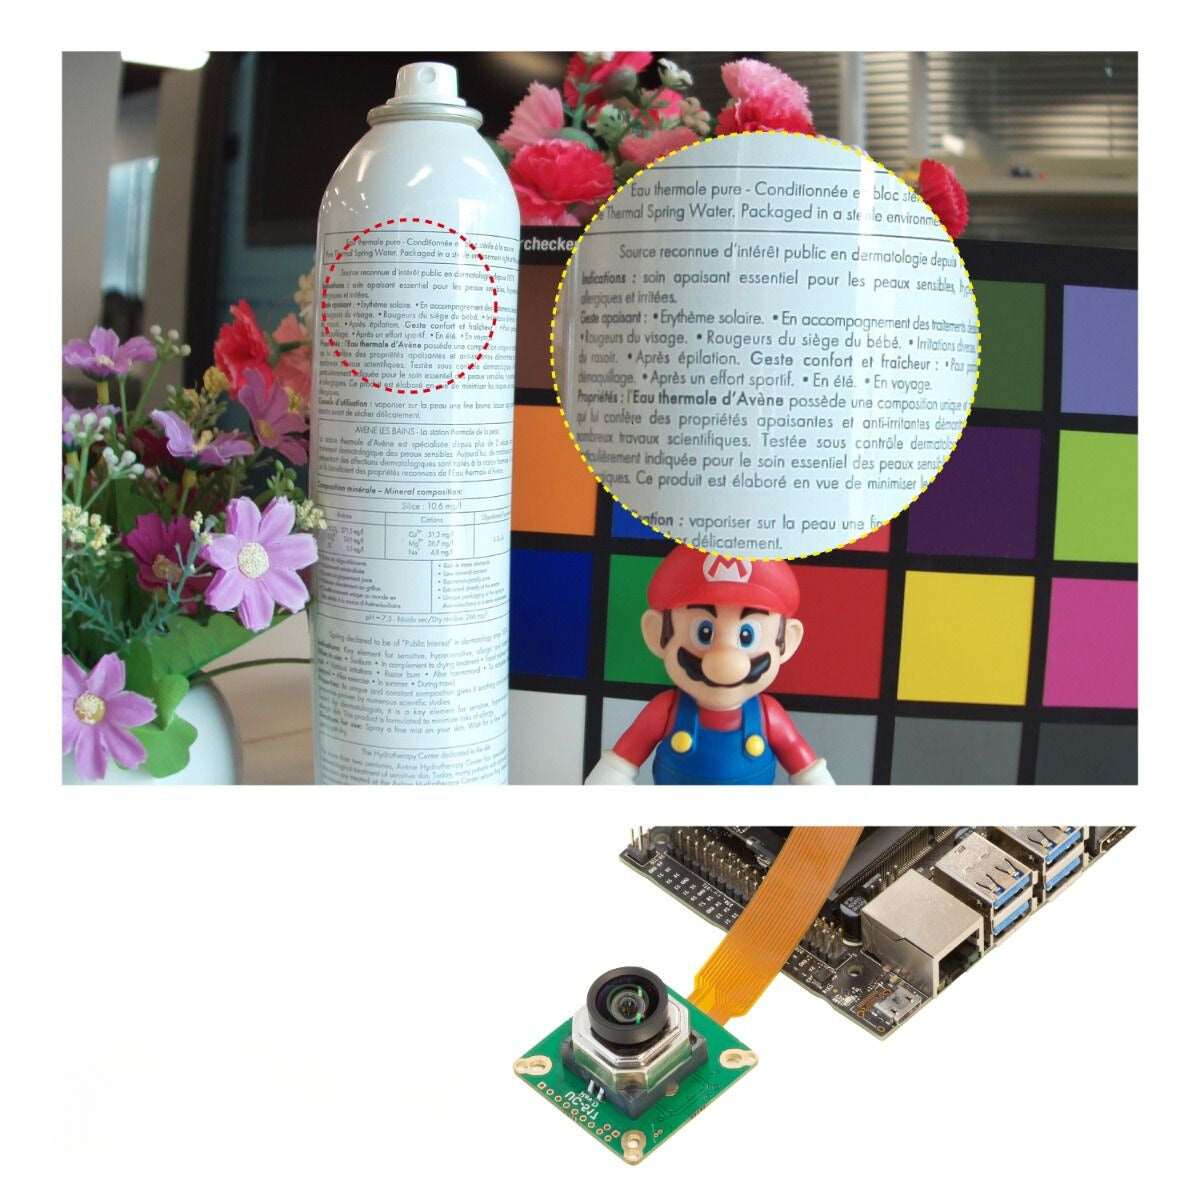 Arducam B0273 12.3MP IMX477 Motorised camera module with an image preview